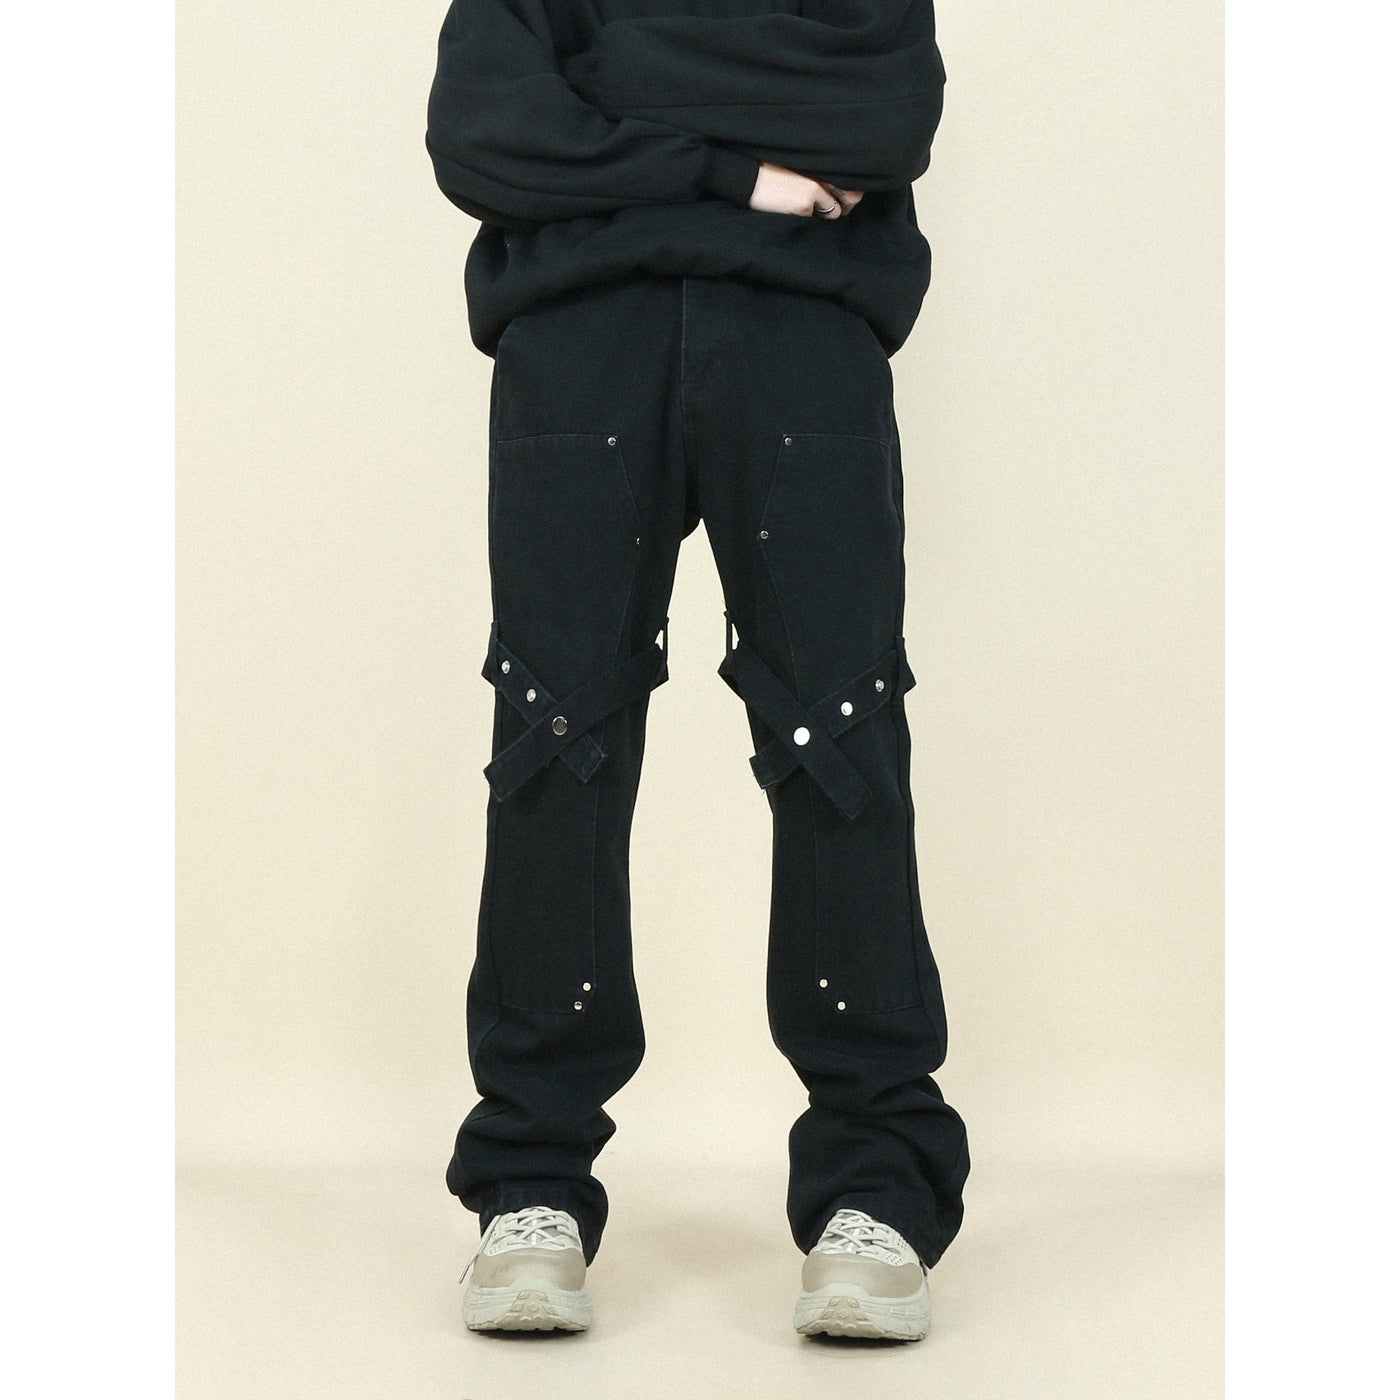 Mr. Nearly Strappy Snap Pants Korean Street Fashion Pants By Mr Nearly Shop Online at OH Vault